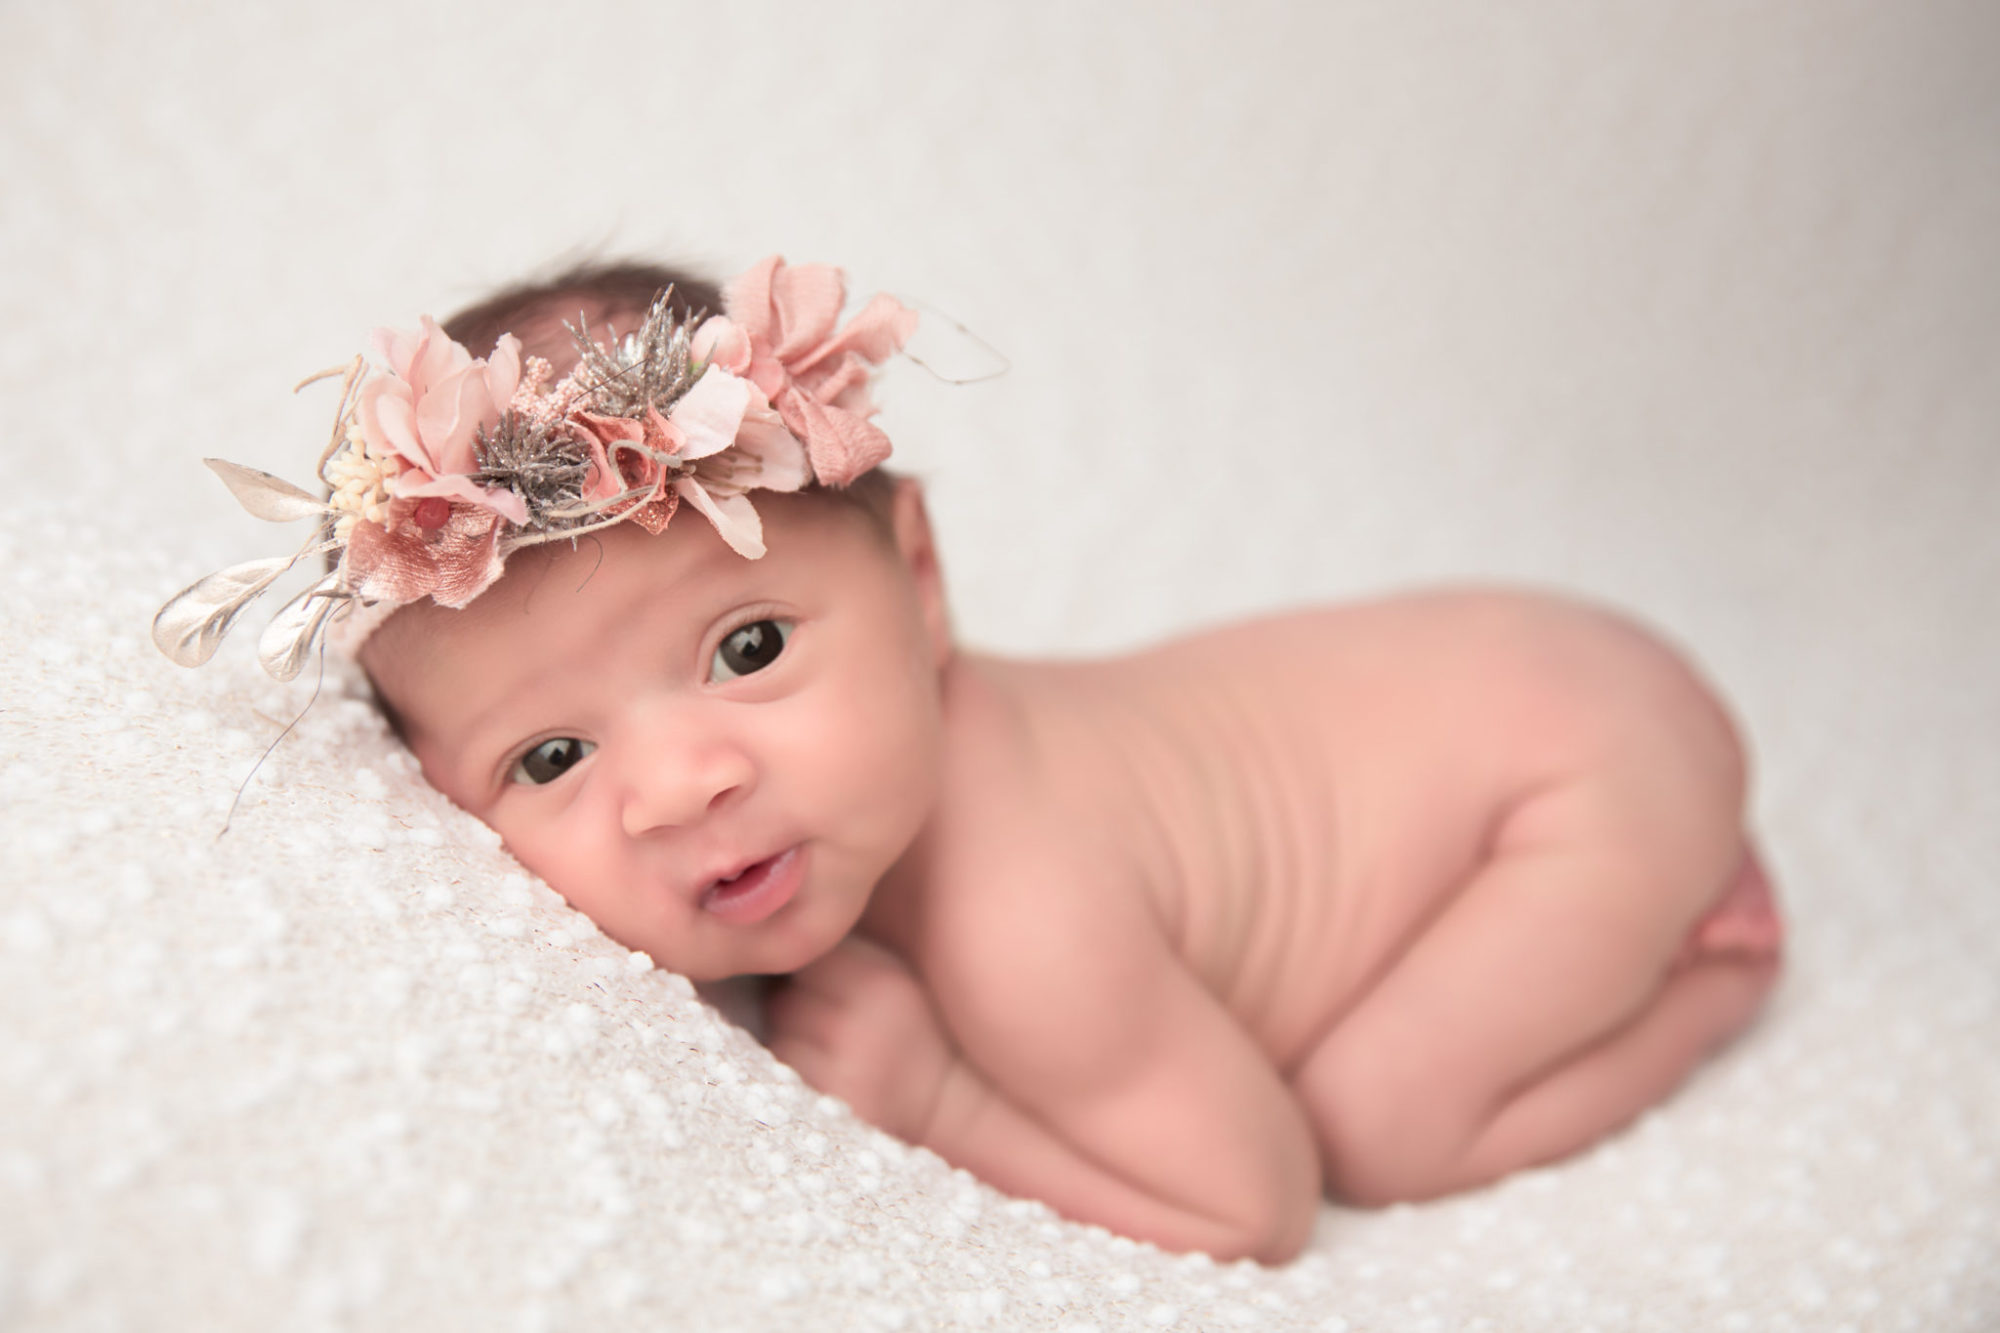 columbus-oh-most-popular-baby-names-in-2020-for-newborns